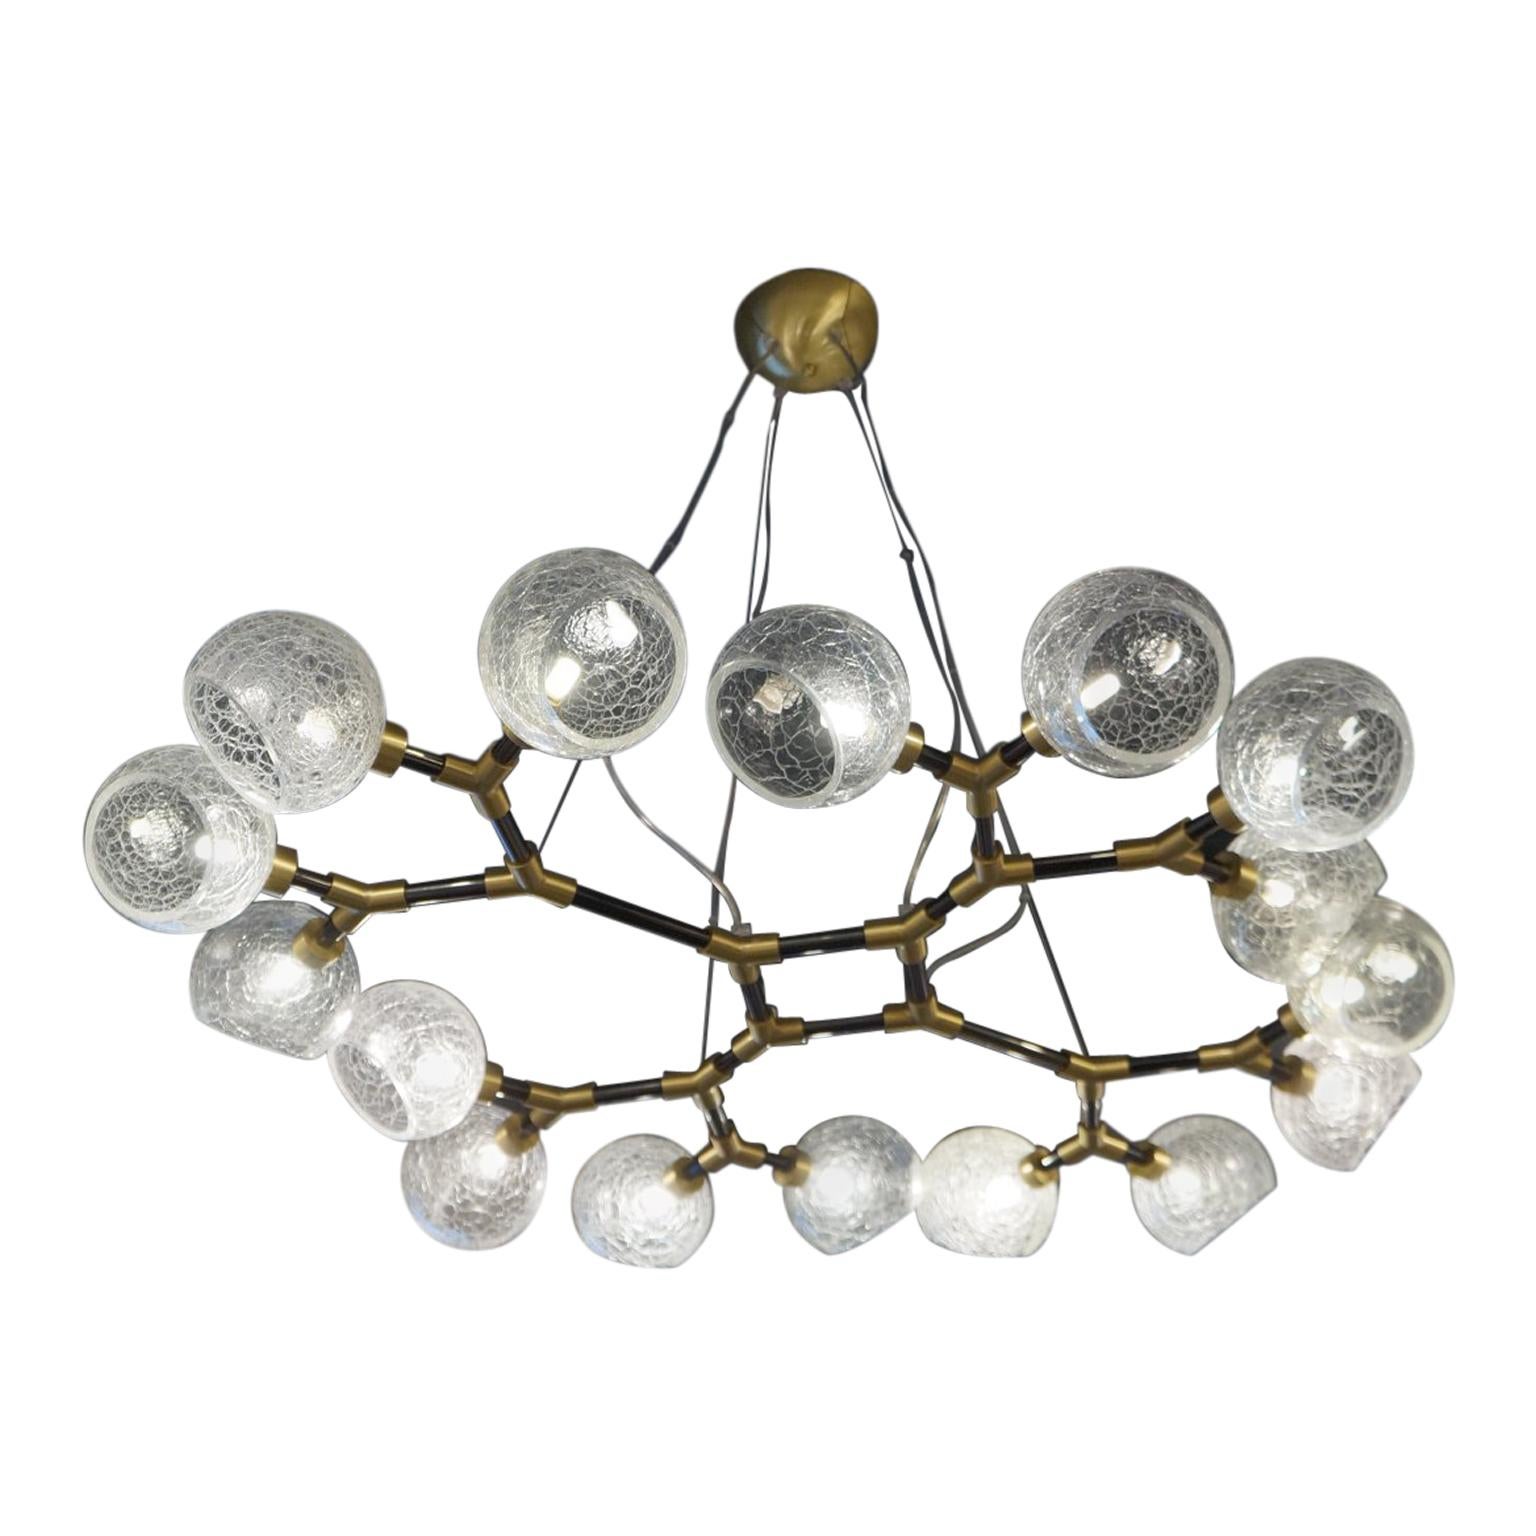 Toso Mid-Century Modern Crystal Murano Glass Chandelier Labyrinth, 1995er Jahre